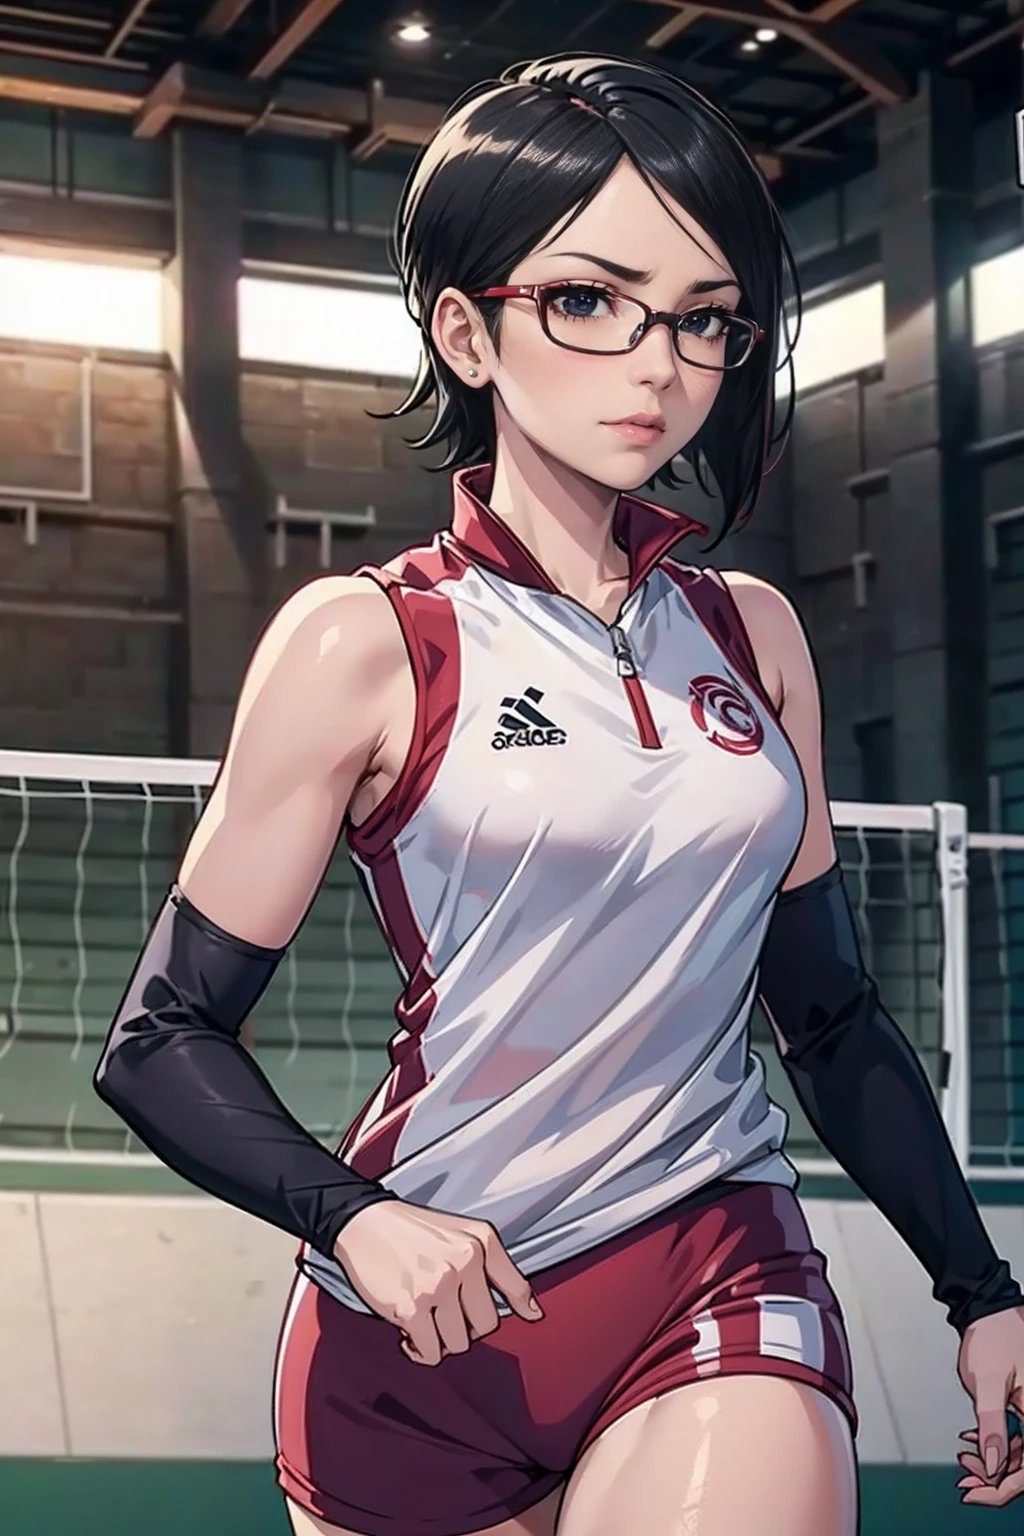 ((1girl, solo ,alone, Sarada Uchiha, short hair, ((smug, ((black eyes)), glasses, small breasts)), uchiha sarada)), ((solo, 1woman, pink lipstick, Extremely detailed, ambient soft lighting, 4k, perfect eyes, a perfect face, perfect lighting, a 1girl)) , ((pink lipstick, Extremely detailed, ambient soft lighting, 4k, perfect eyes, a perfect face, perfect lighting, a 1girl)) , (extremely detailed beautiful face), ((volleyball uniform, volleyball player, women's volleyball, volleyball shorts, volleyball regatta, volleyball court, olympic court, volleyball stadium)), (((fitness))) 1girl, solo, standing